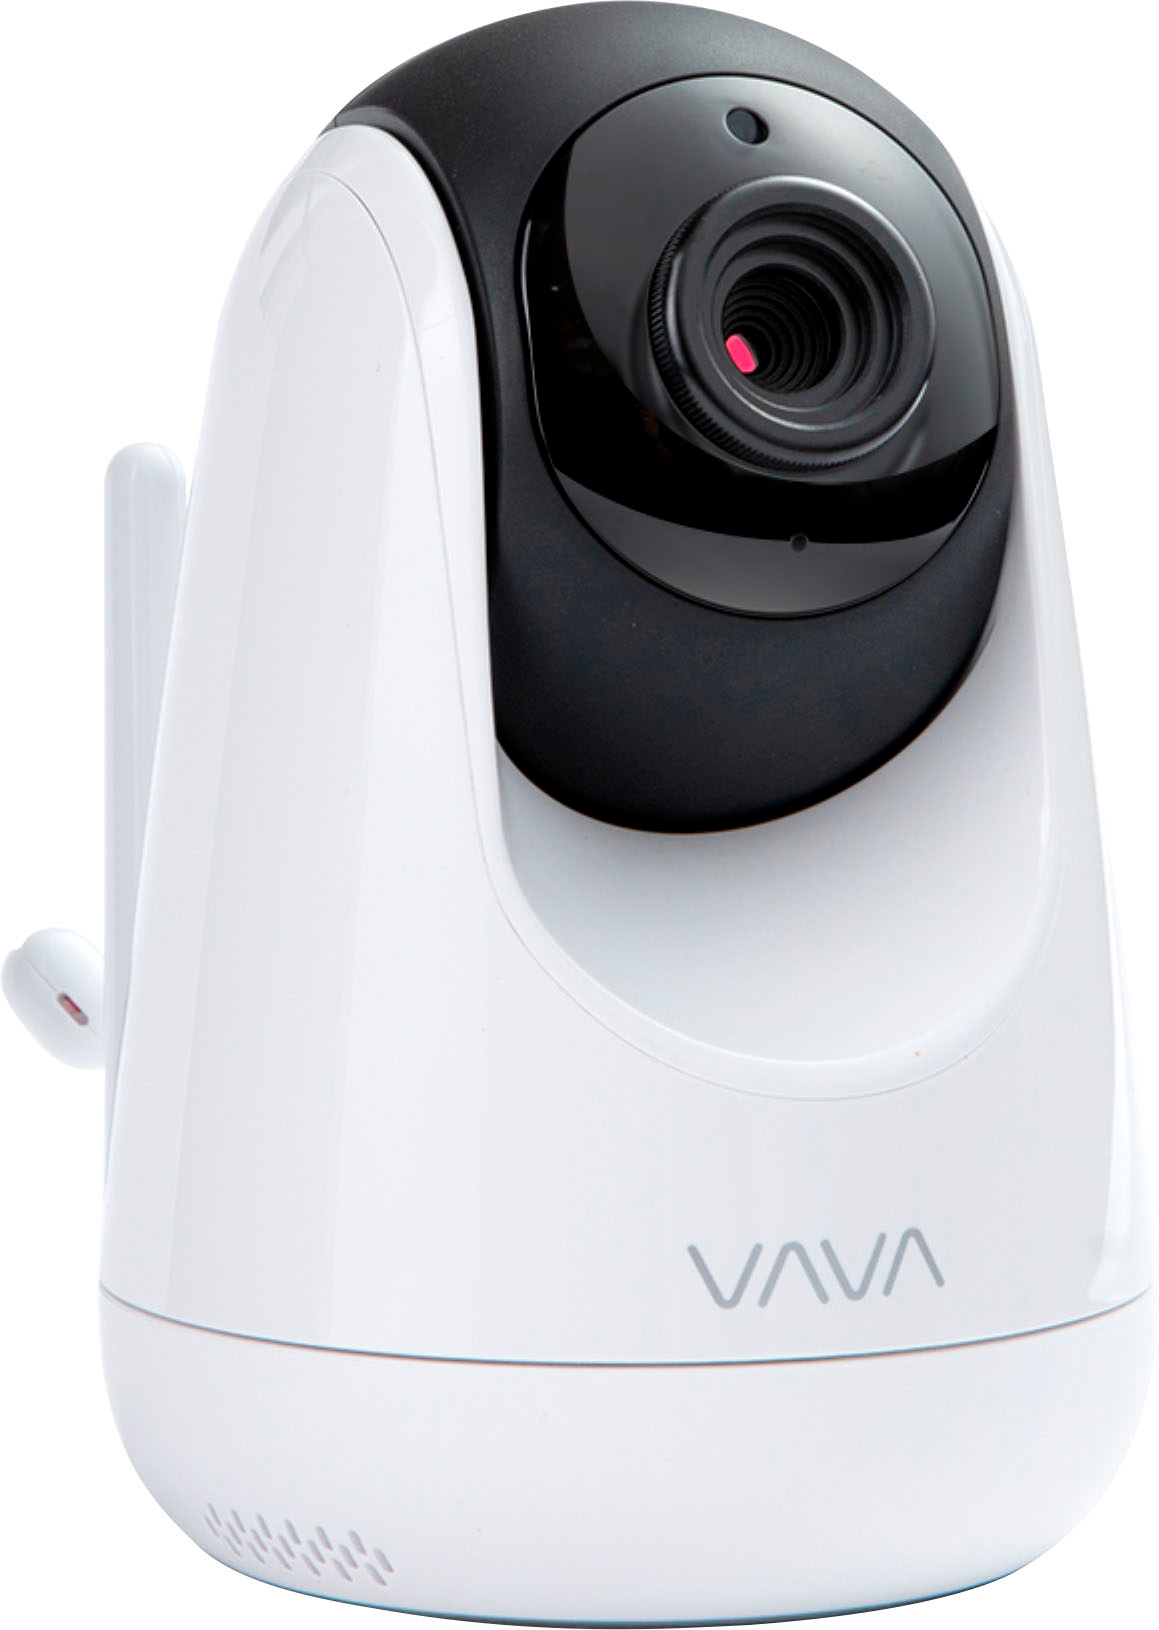 VAVA Baby Monitor Add-on Bluetooth Camera with 720P HD Video and